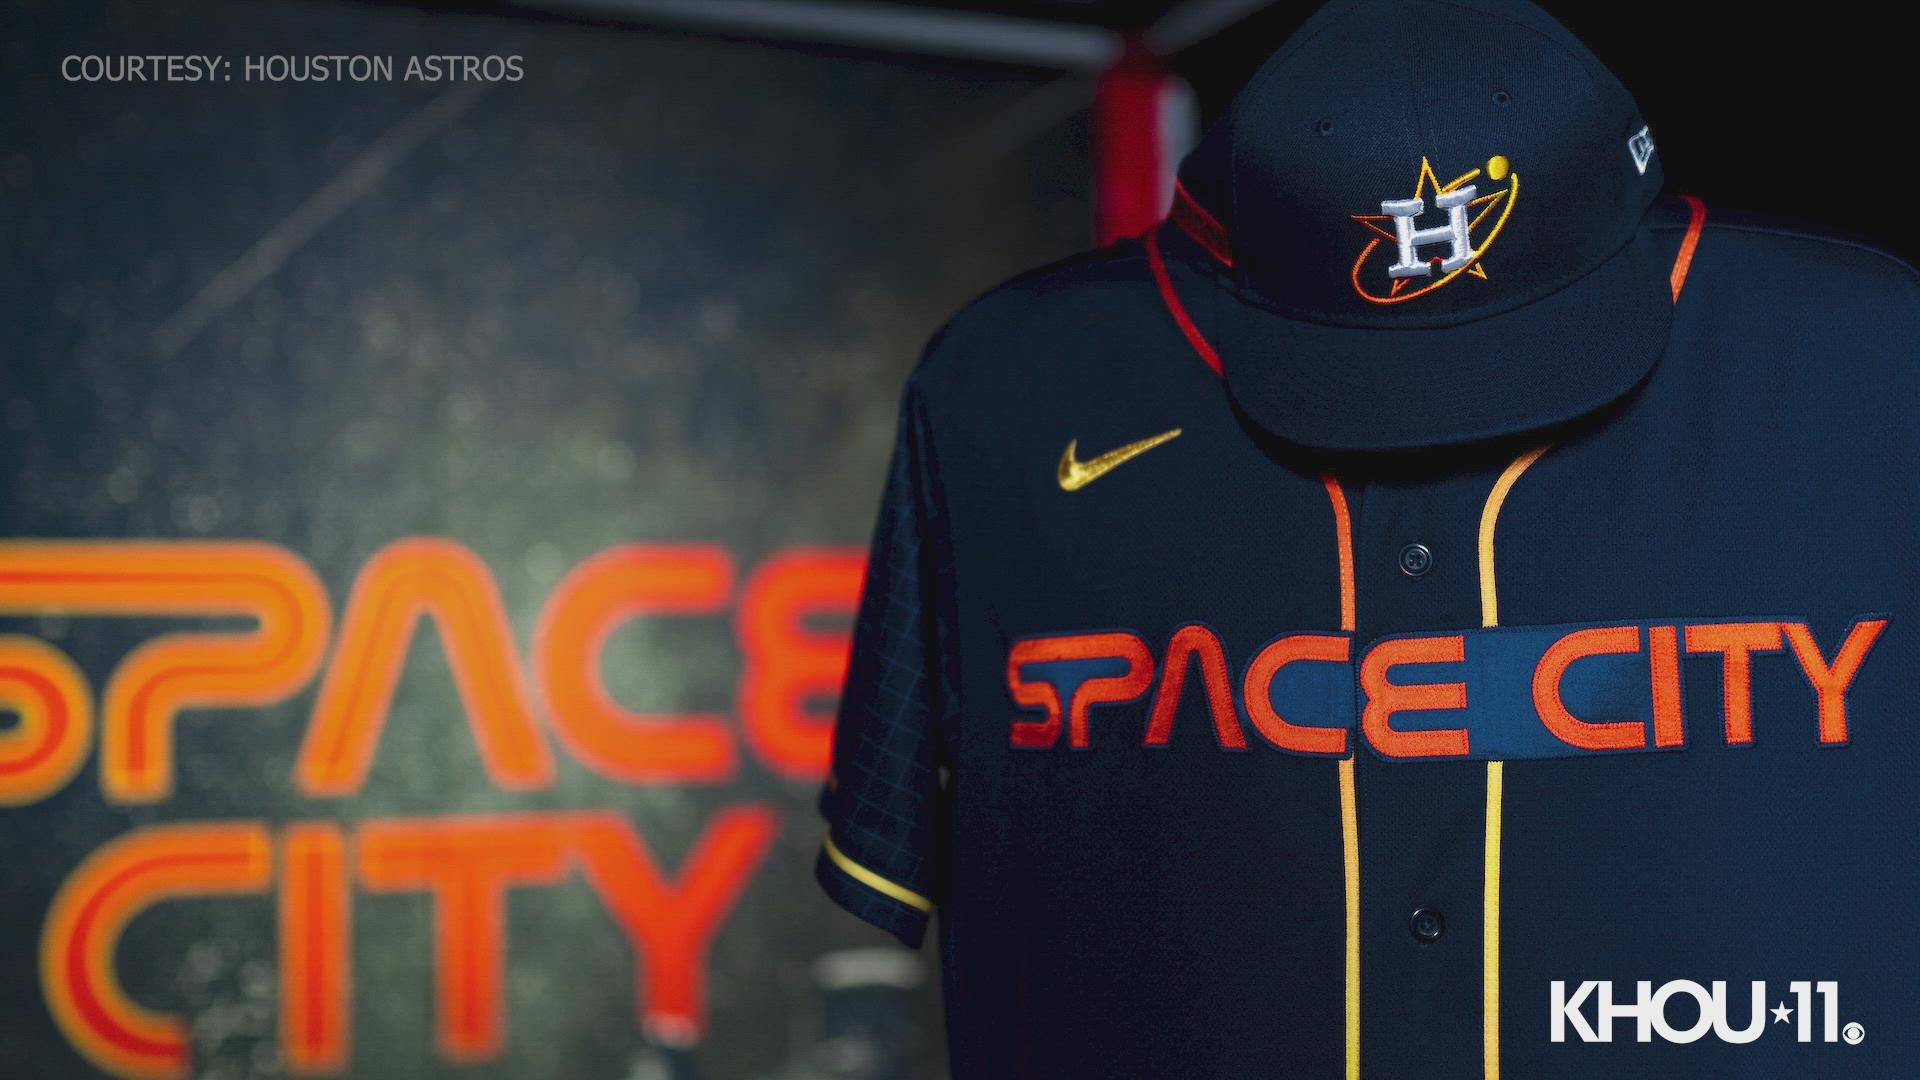 The "Space City" themed uniforms were unveiled Sunday and are available for sale at the Astros Team Store at Minute Maid Park.